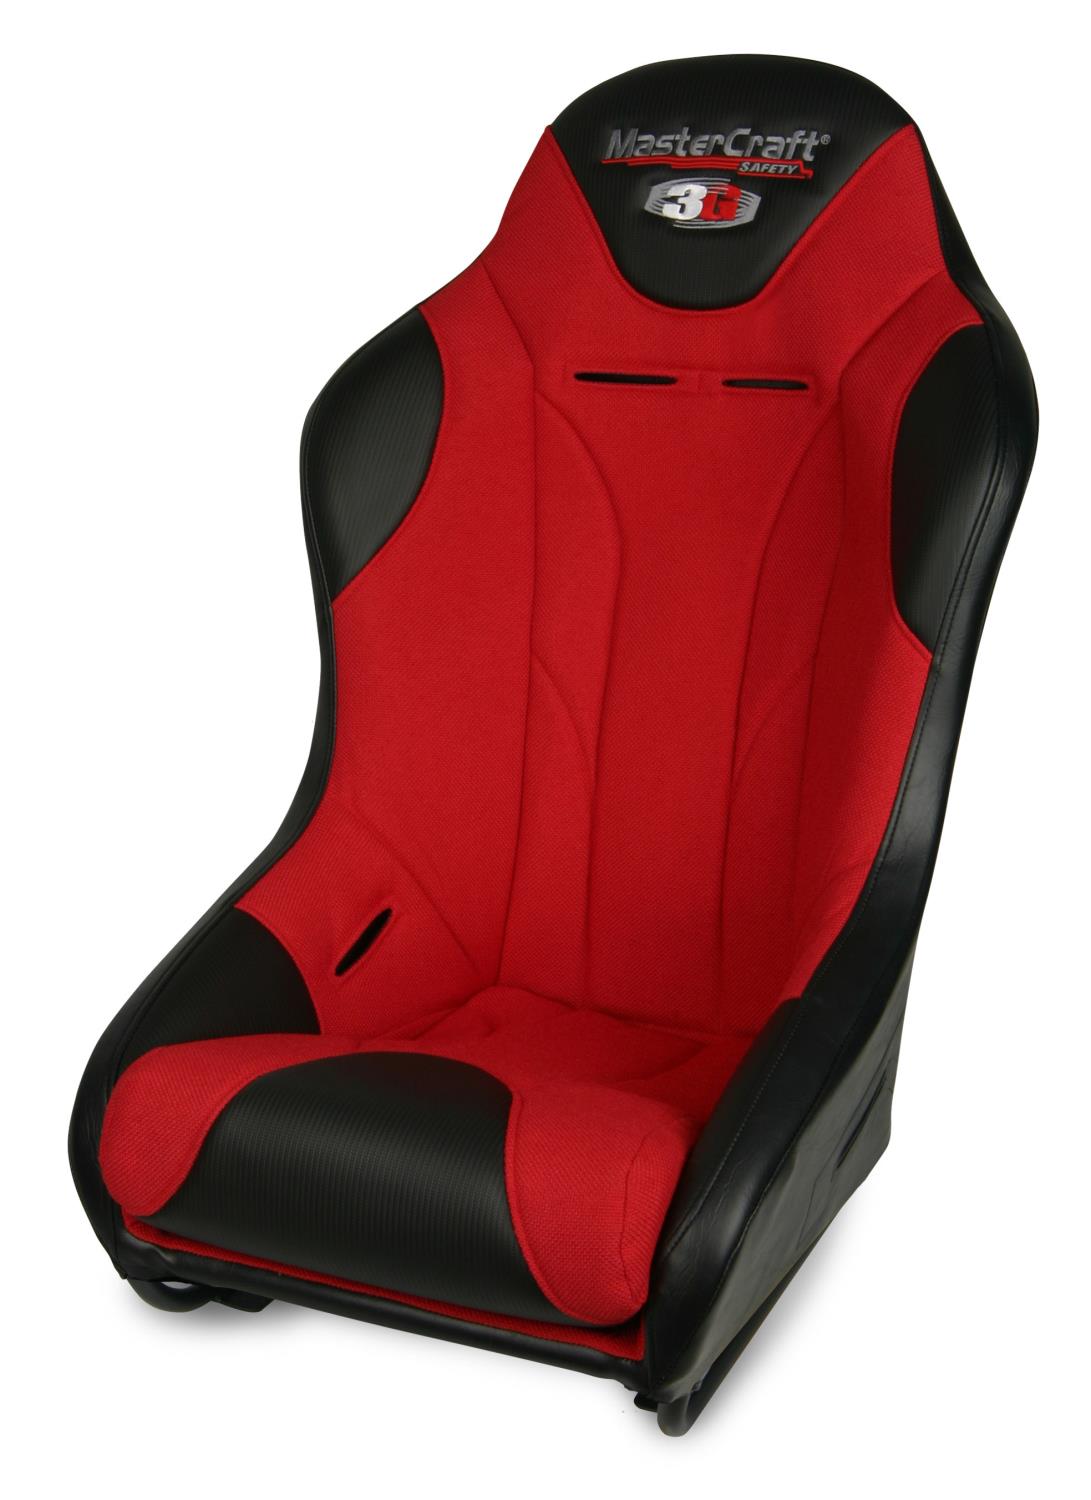 568022 1 in. WIDER 3G Seat w/DirtSport Stitch Pattern, Black with Red Fabric Center and Red Side Panels, Black Band